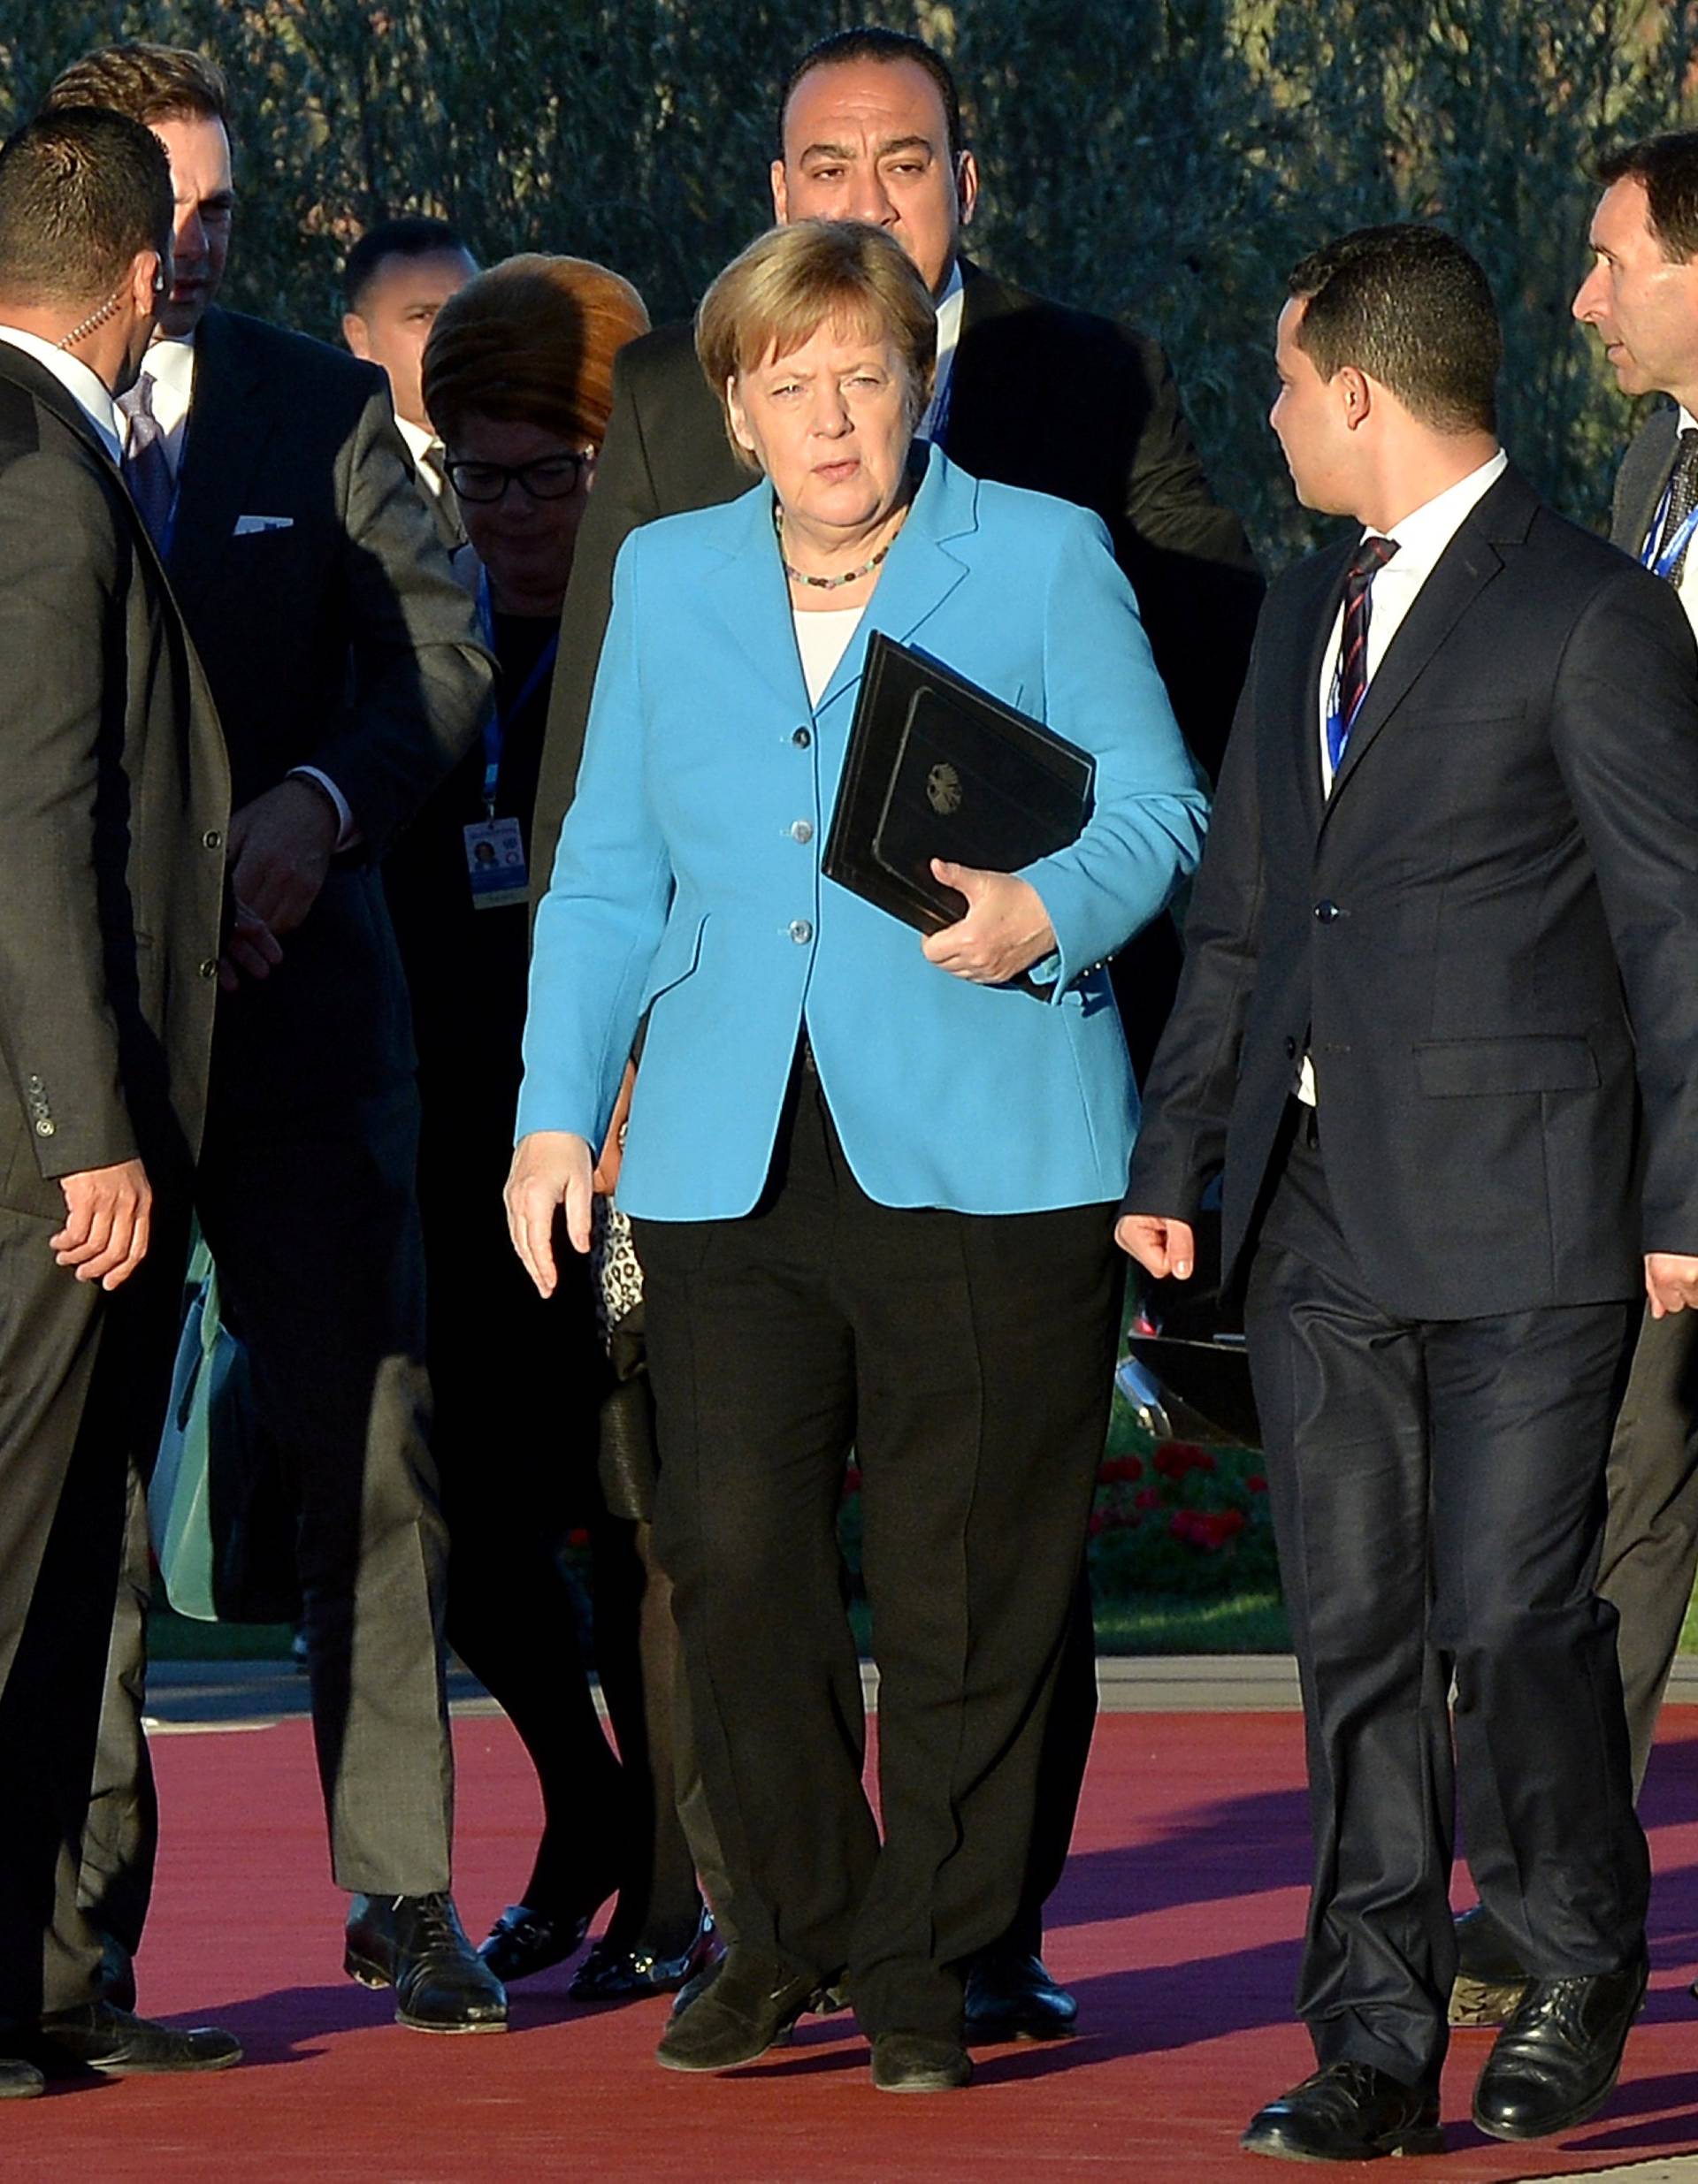 German Chancellor Angela Merkel arrives to the Intergovernmental Conference to Adopt the Global Compact for Safe, Orderly and Regular Migration, in Marrakesh